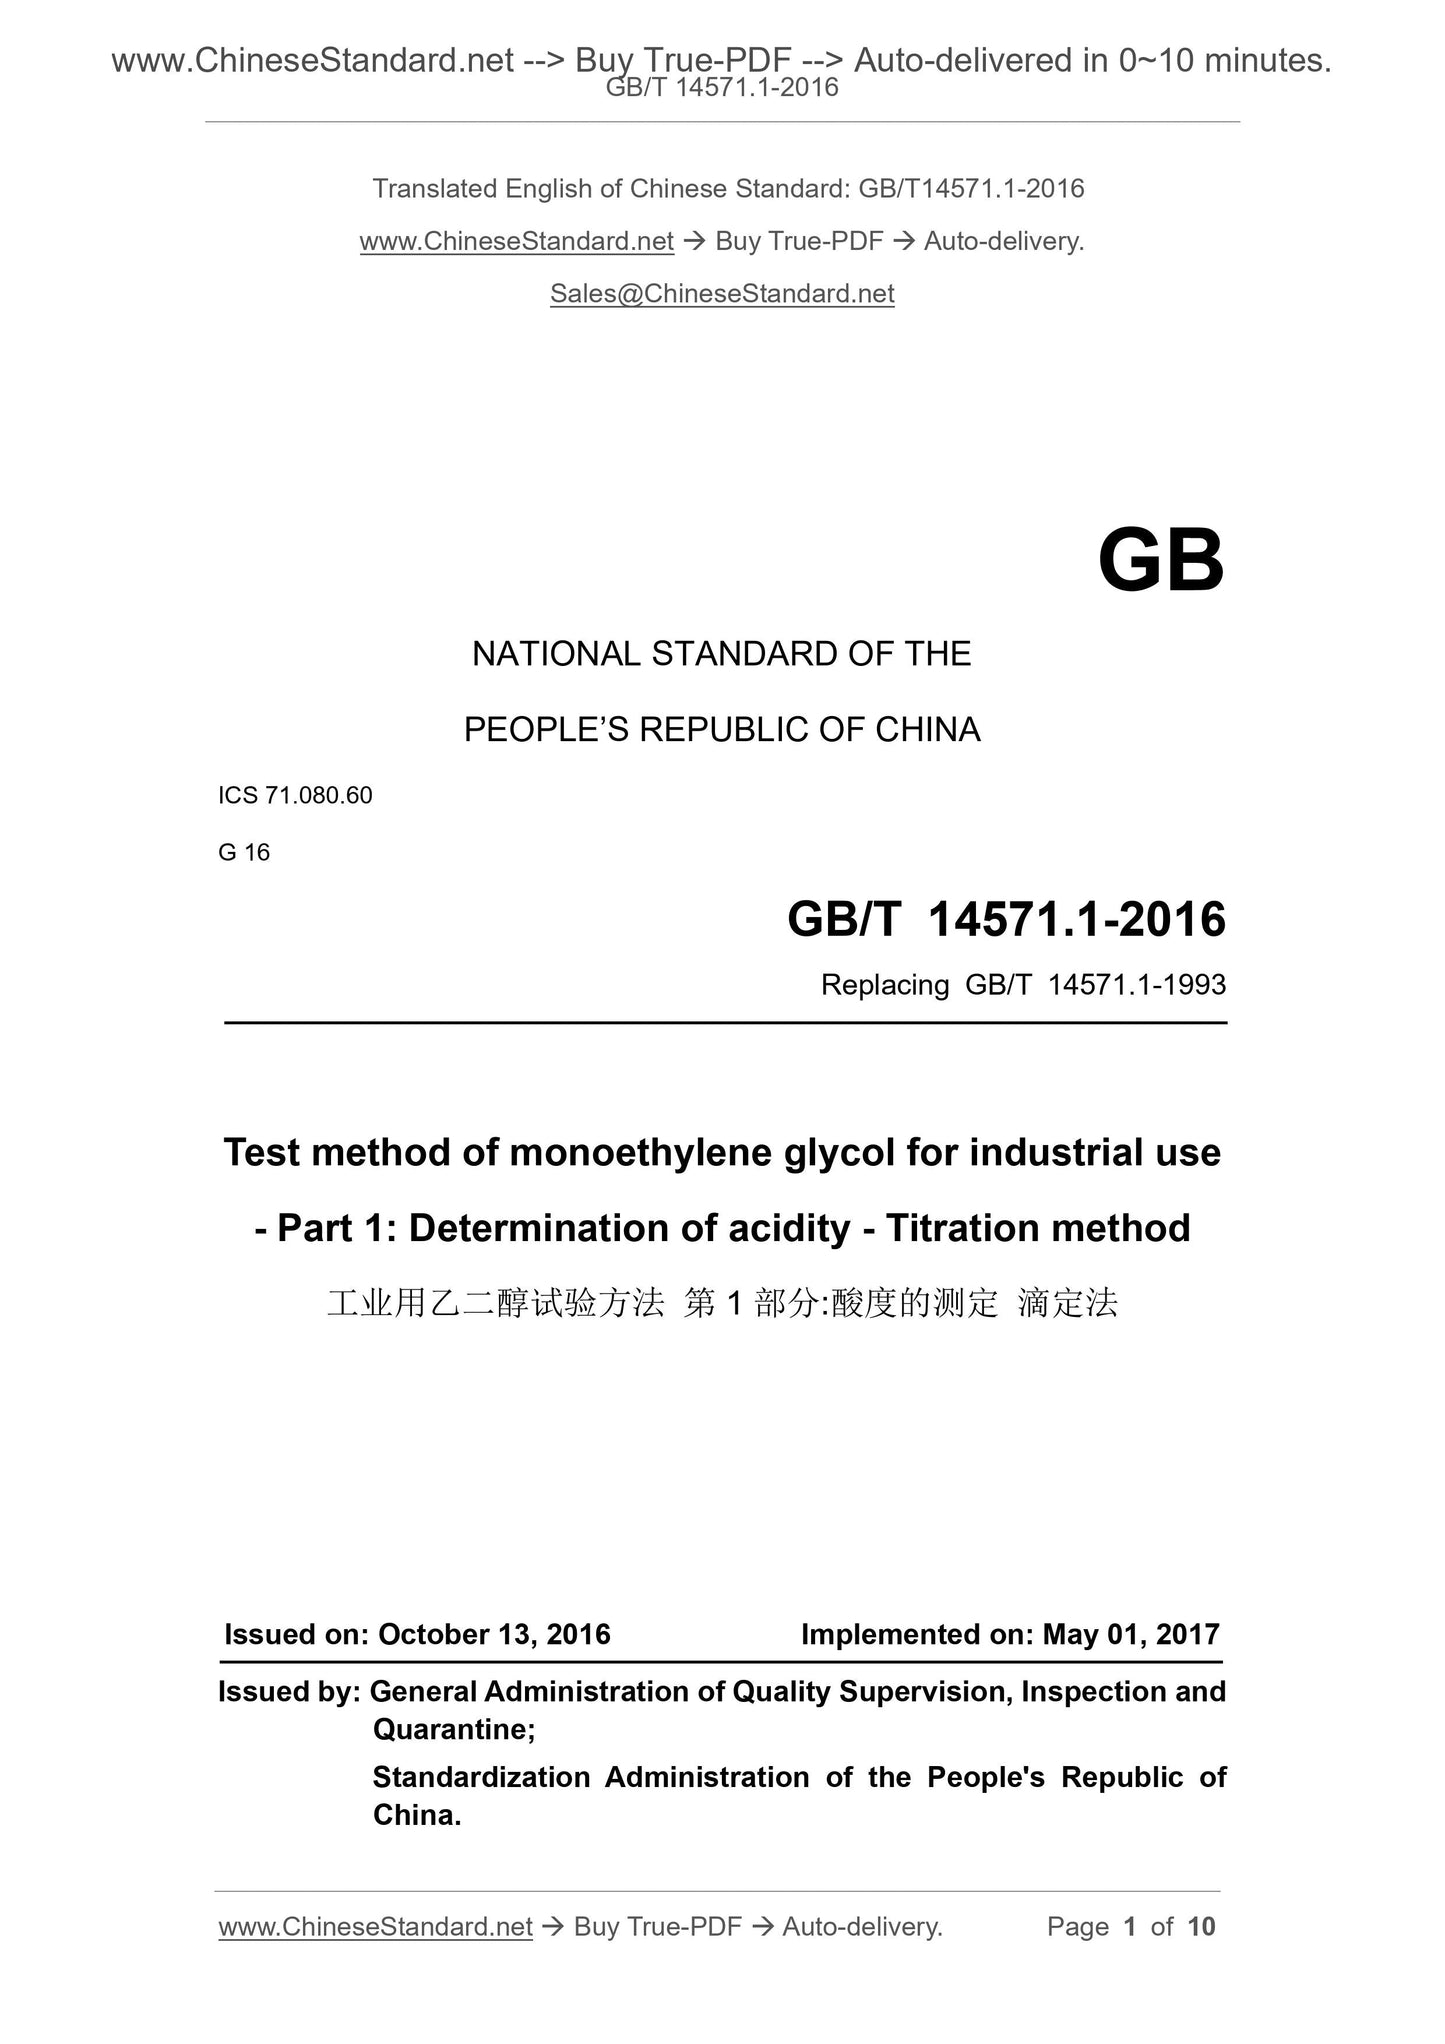 GB/T 14571.1-2016 Page 1